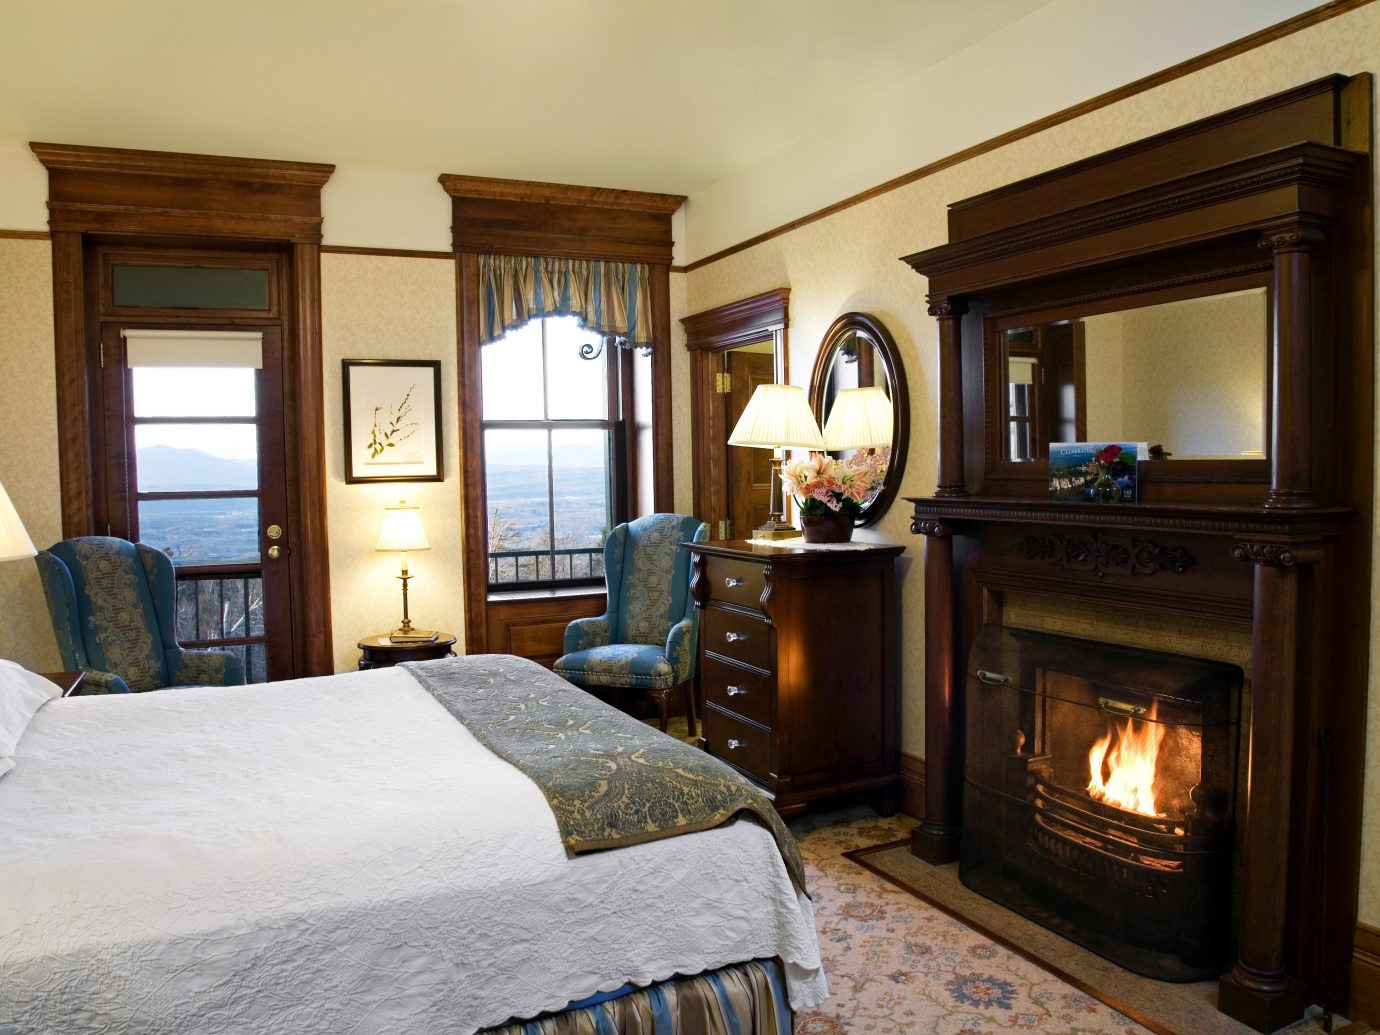 Bedroom Classic Fireplace Hotels Lakes + Rivers Luxury Mountains New York Outdoor Activities Resort Romance Romantic Hotels indoor wall room bed floor property estate home house living room Suite cottage real estate interior design mansion Villa farmhouse apartment decorated